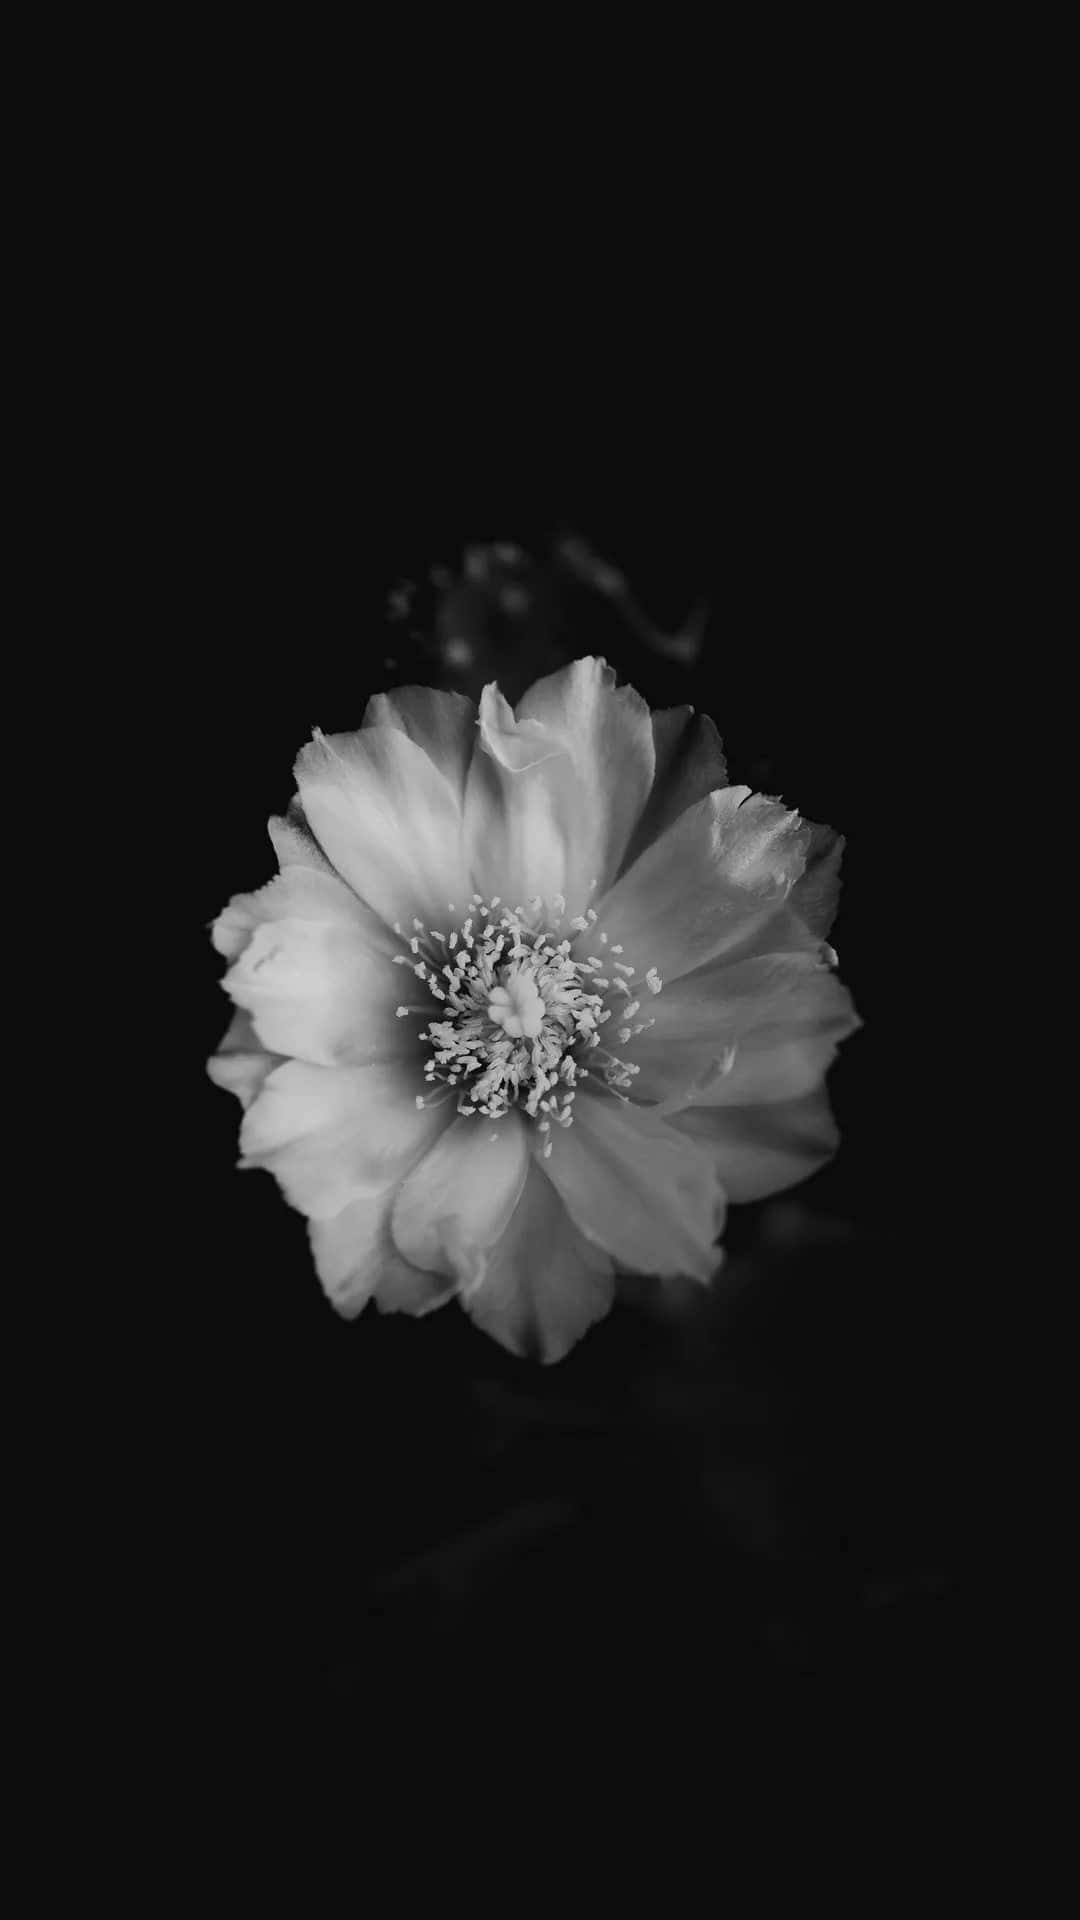 A delicate flower in black and white Wallpaper